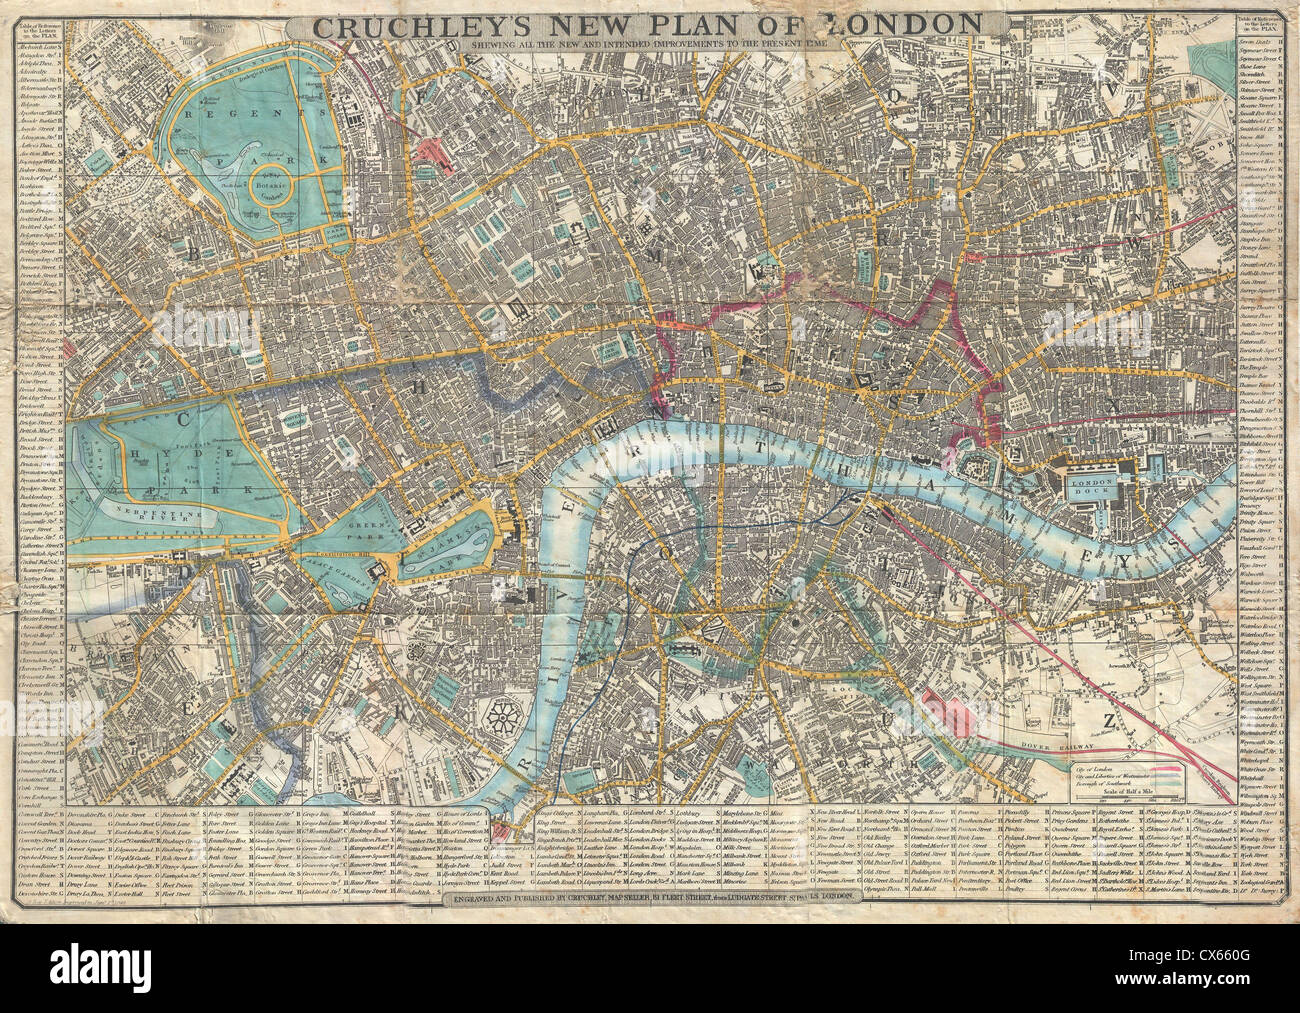 1848 Crutchley Pocket Map or Plan of London, England Stock Photo